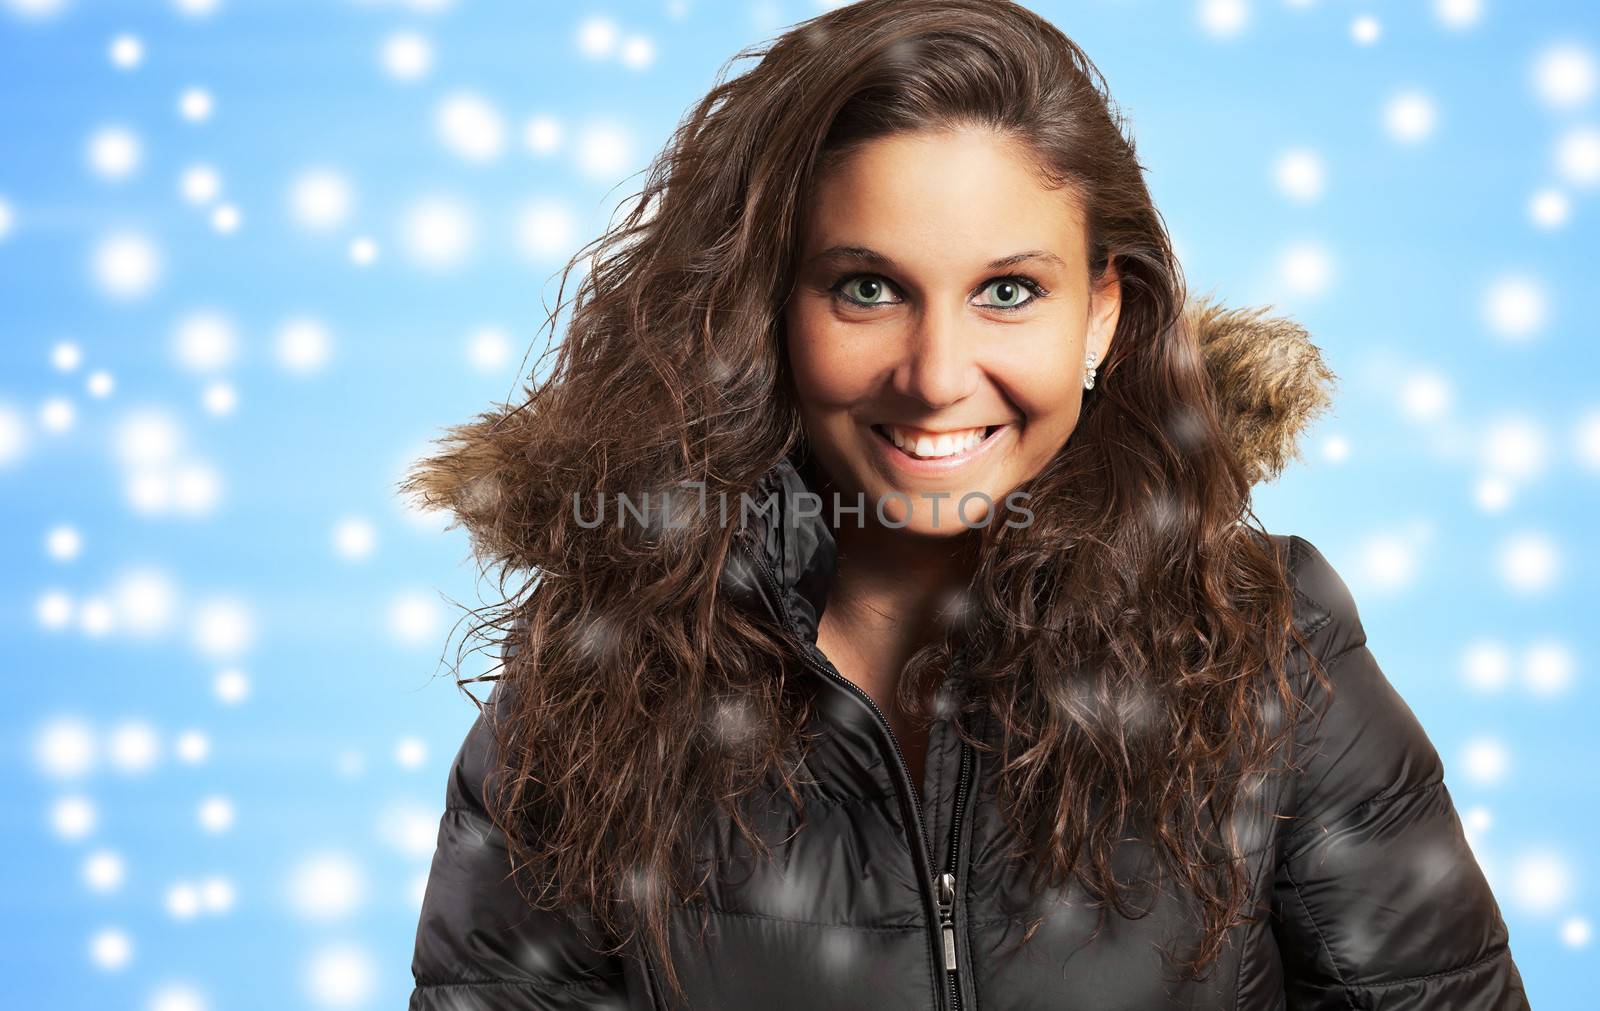 Studio portrait of a nice young woman and winter background